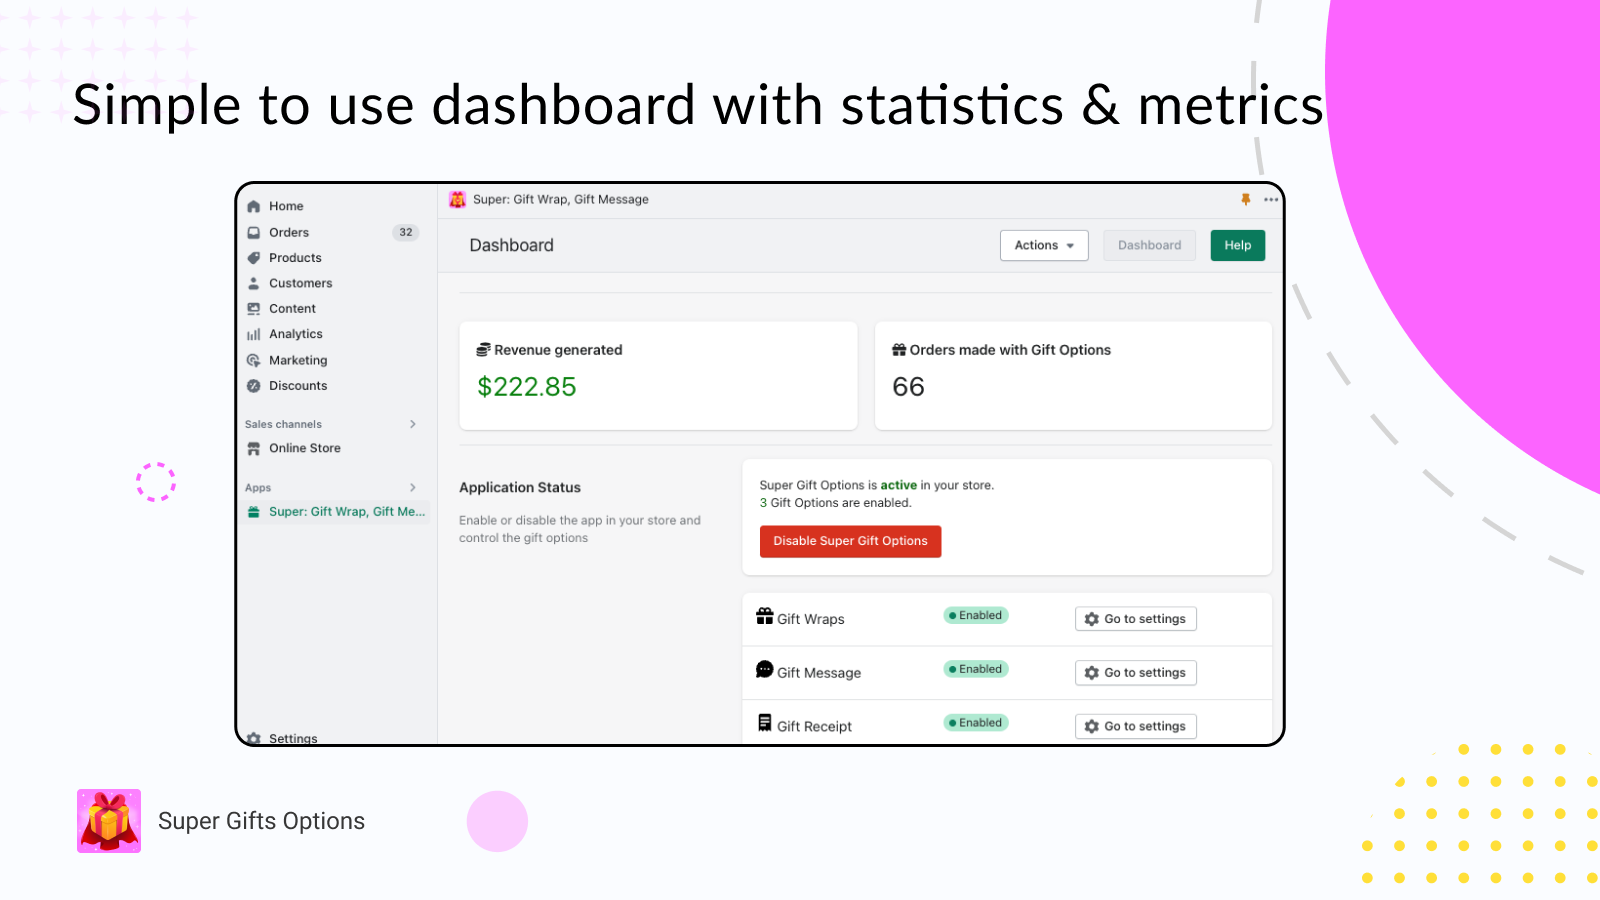 Simple, easy to use dashboard with high level of customization